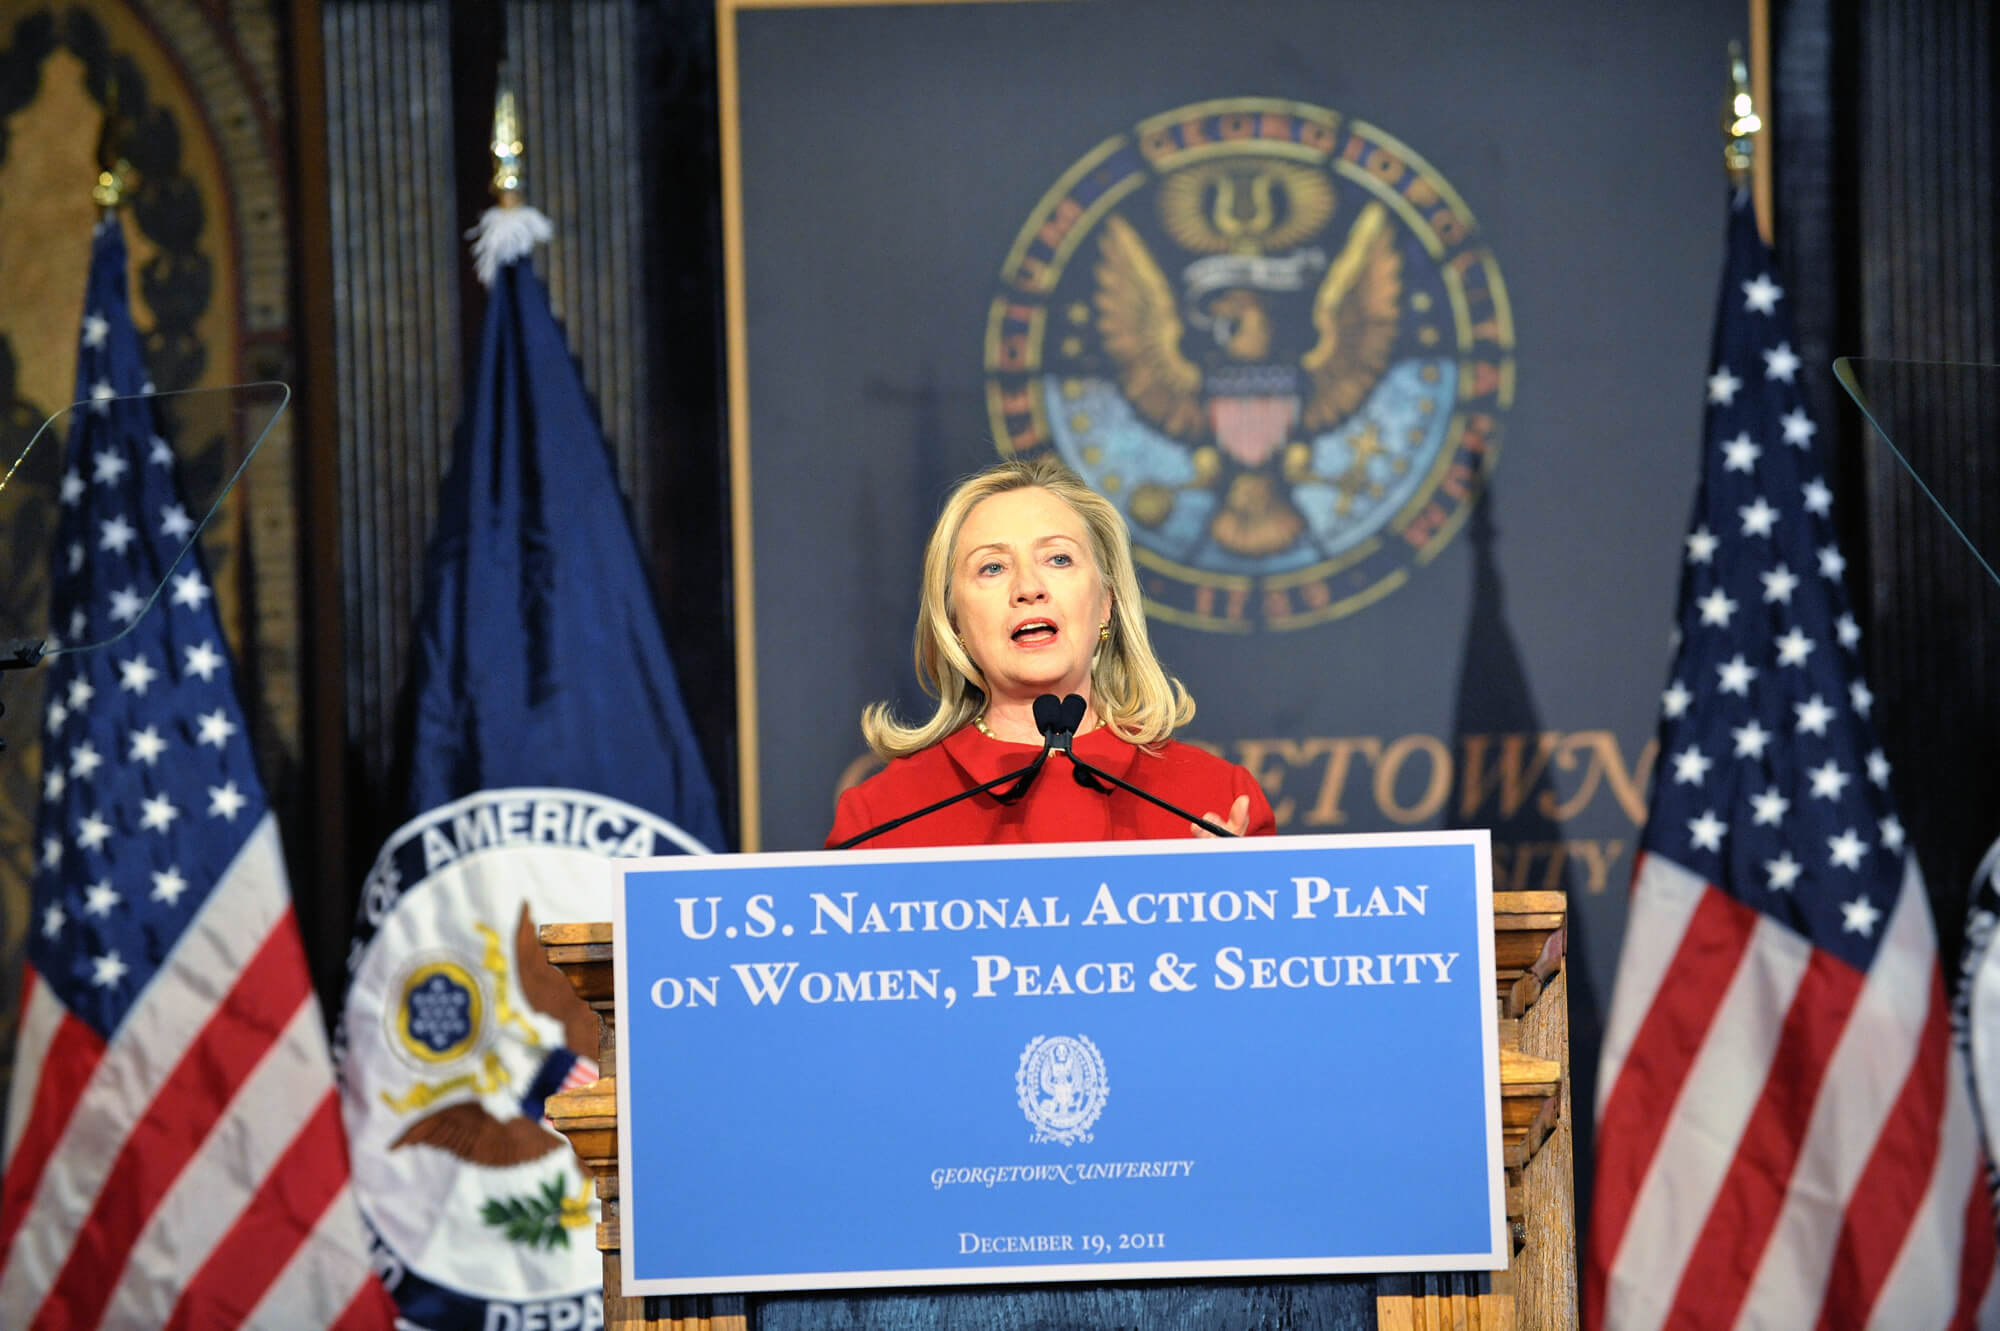 Joachim - U.S. Secretary of State Hillary Rodham Clinton discusses new efforts across the U.S. government to support women's participation in peace and security at Georgetown University in 2011. State Department photo